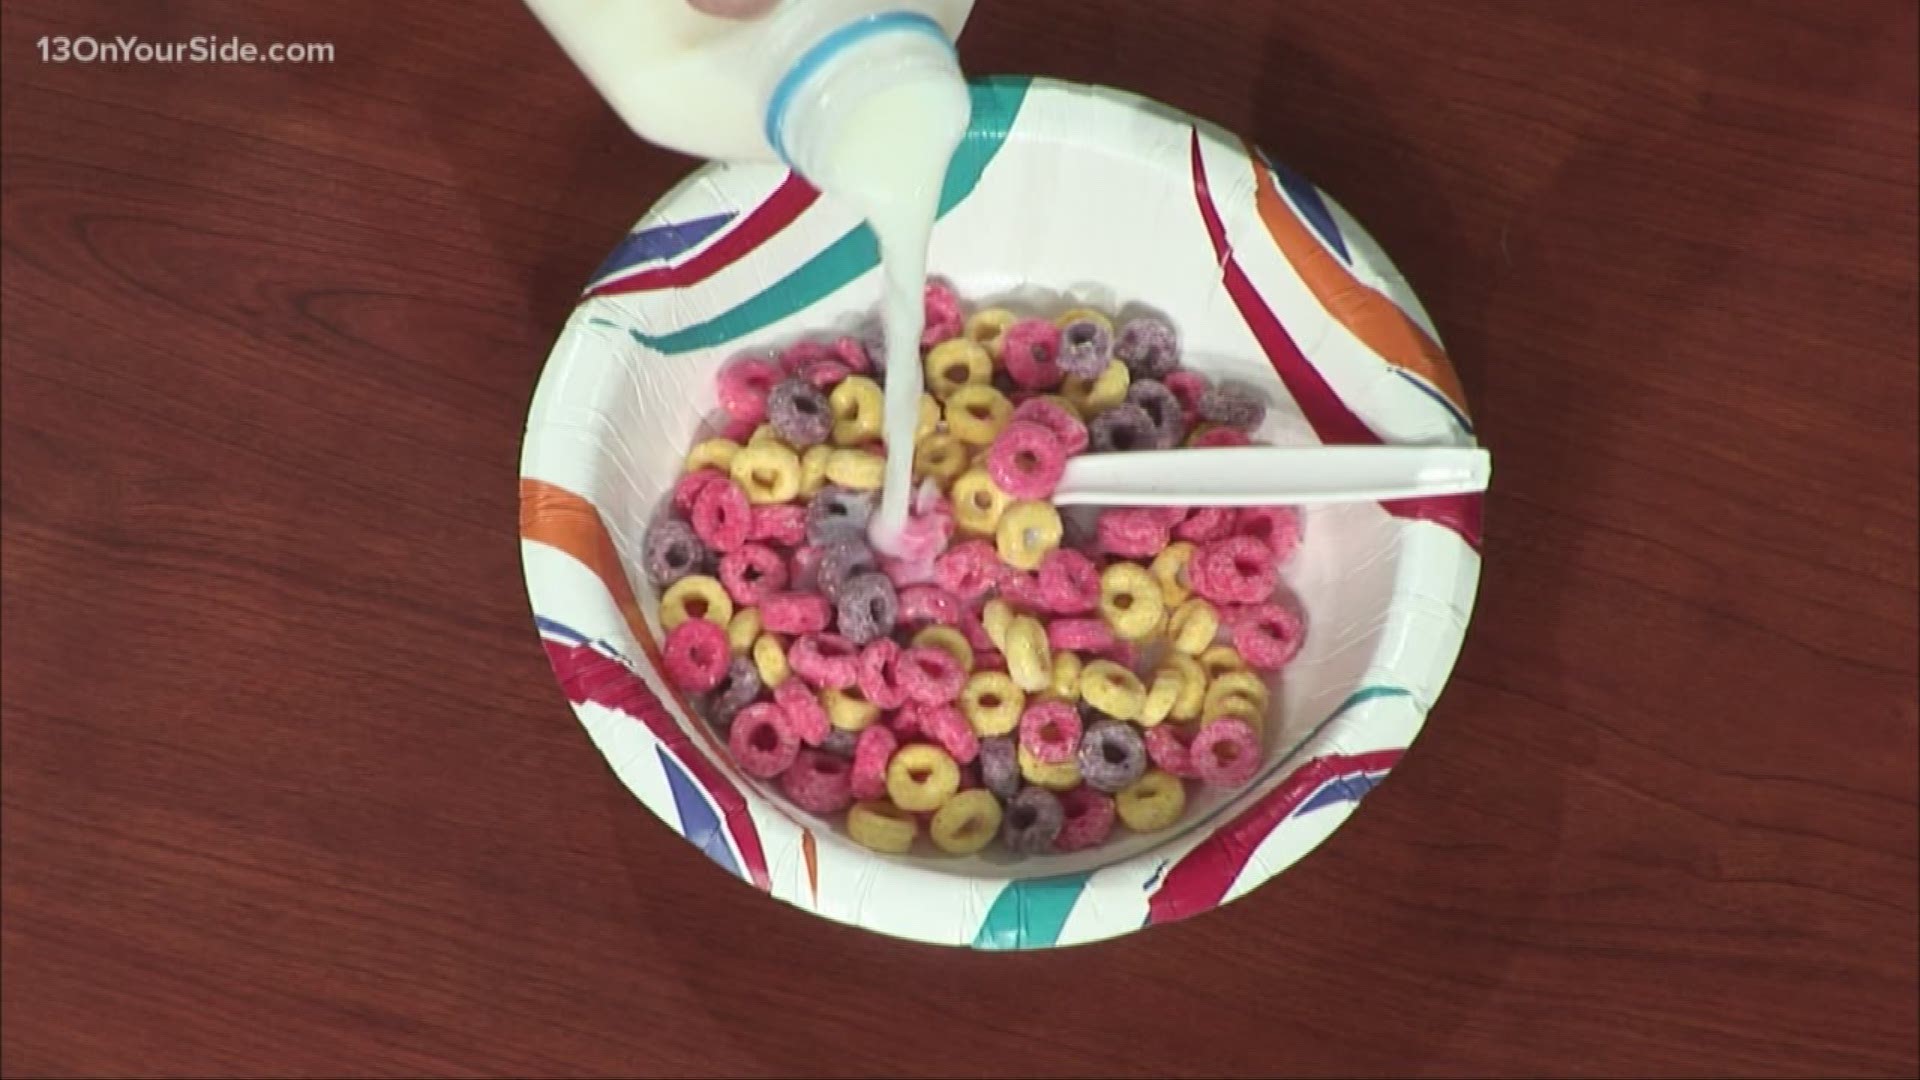 In this latest edition of "Try It Before You Buy It", Kristin Mazur puts a limited-edition birthday cereal to the test, to see if it's worth celebrating.